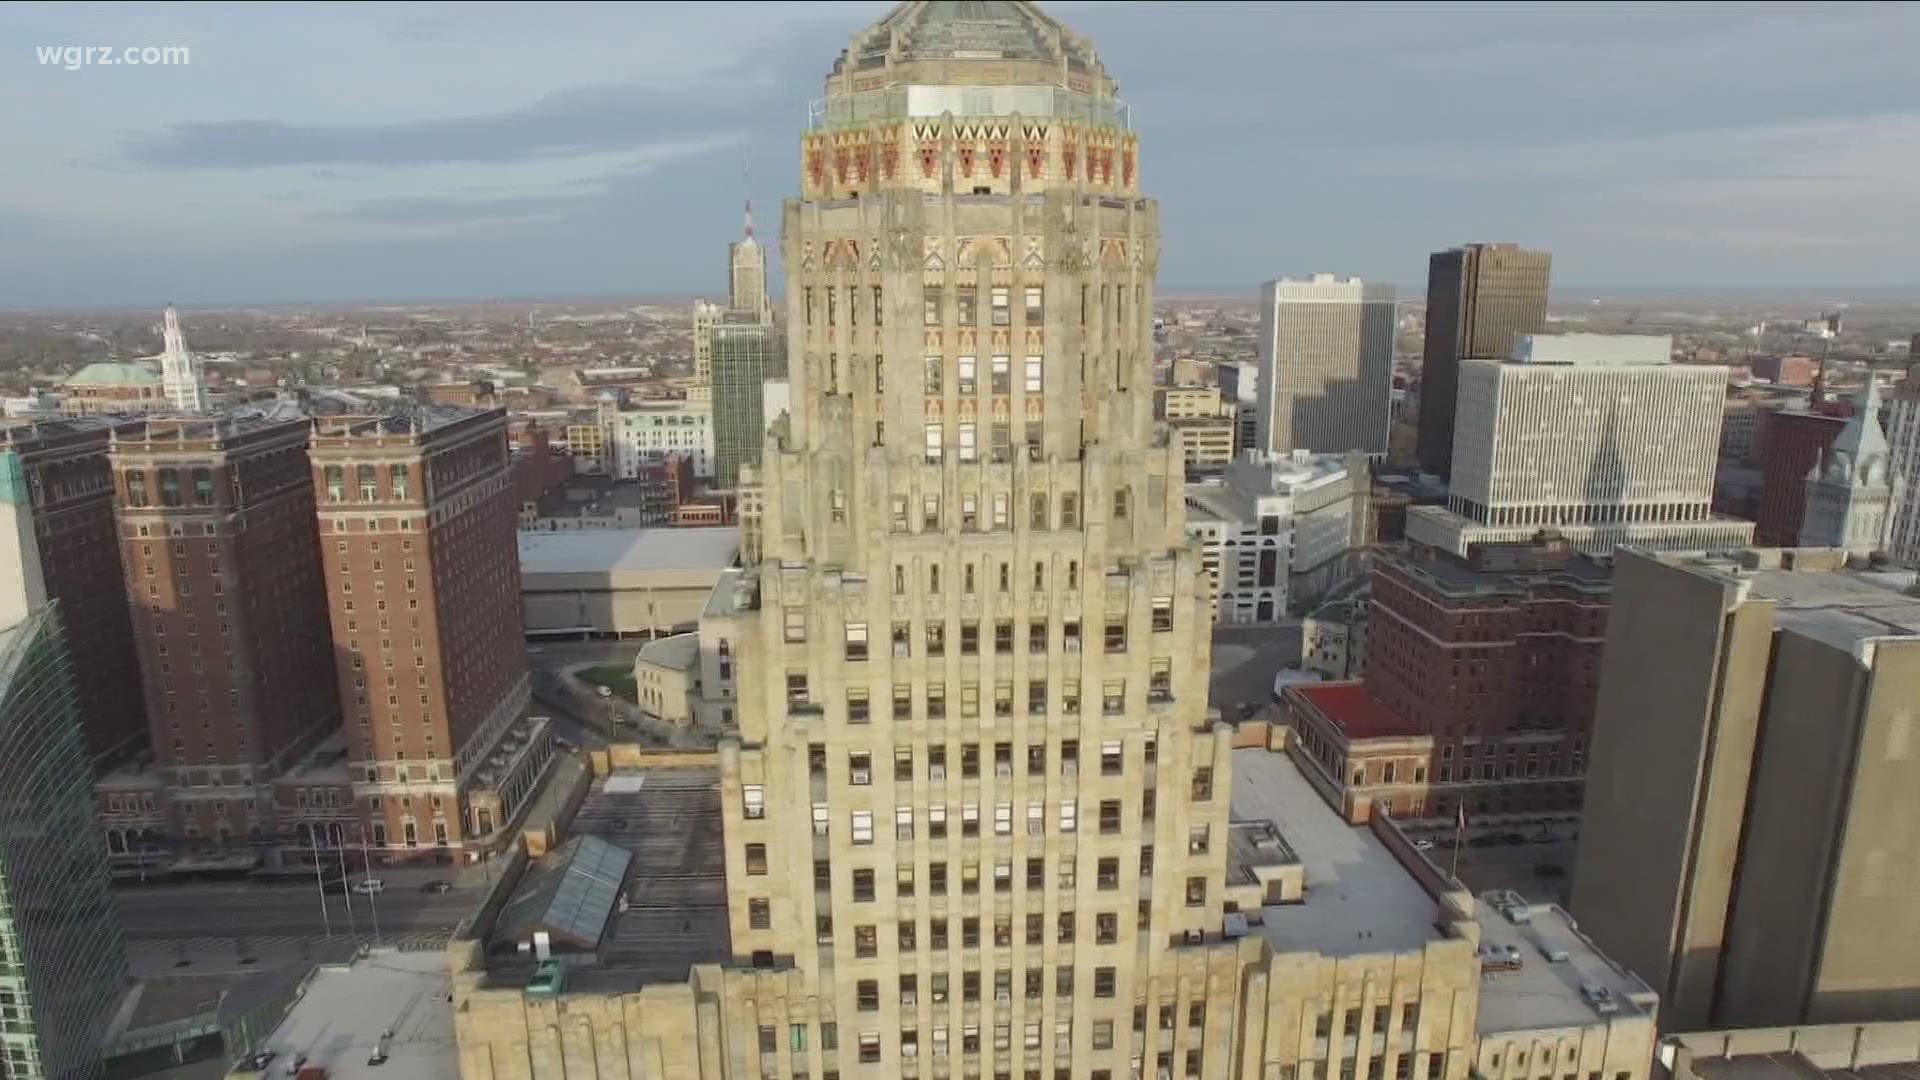 Buffalo City Hall is back open today to the public for walk-in visits...